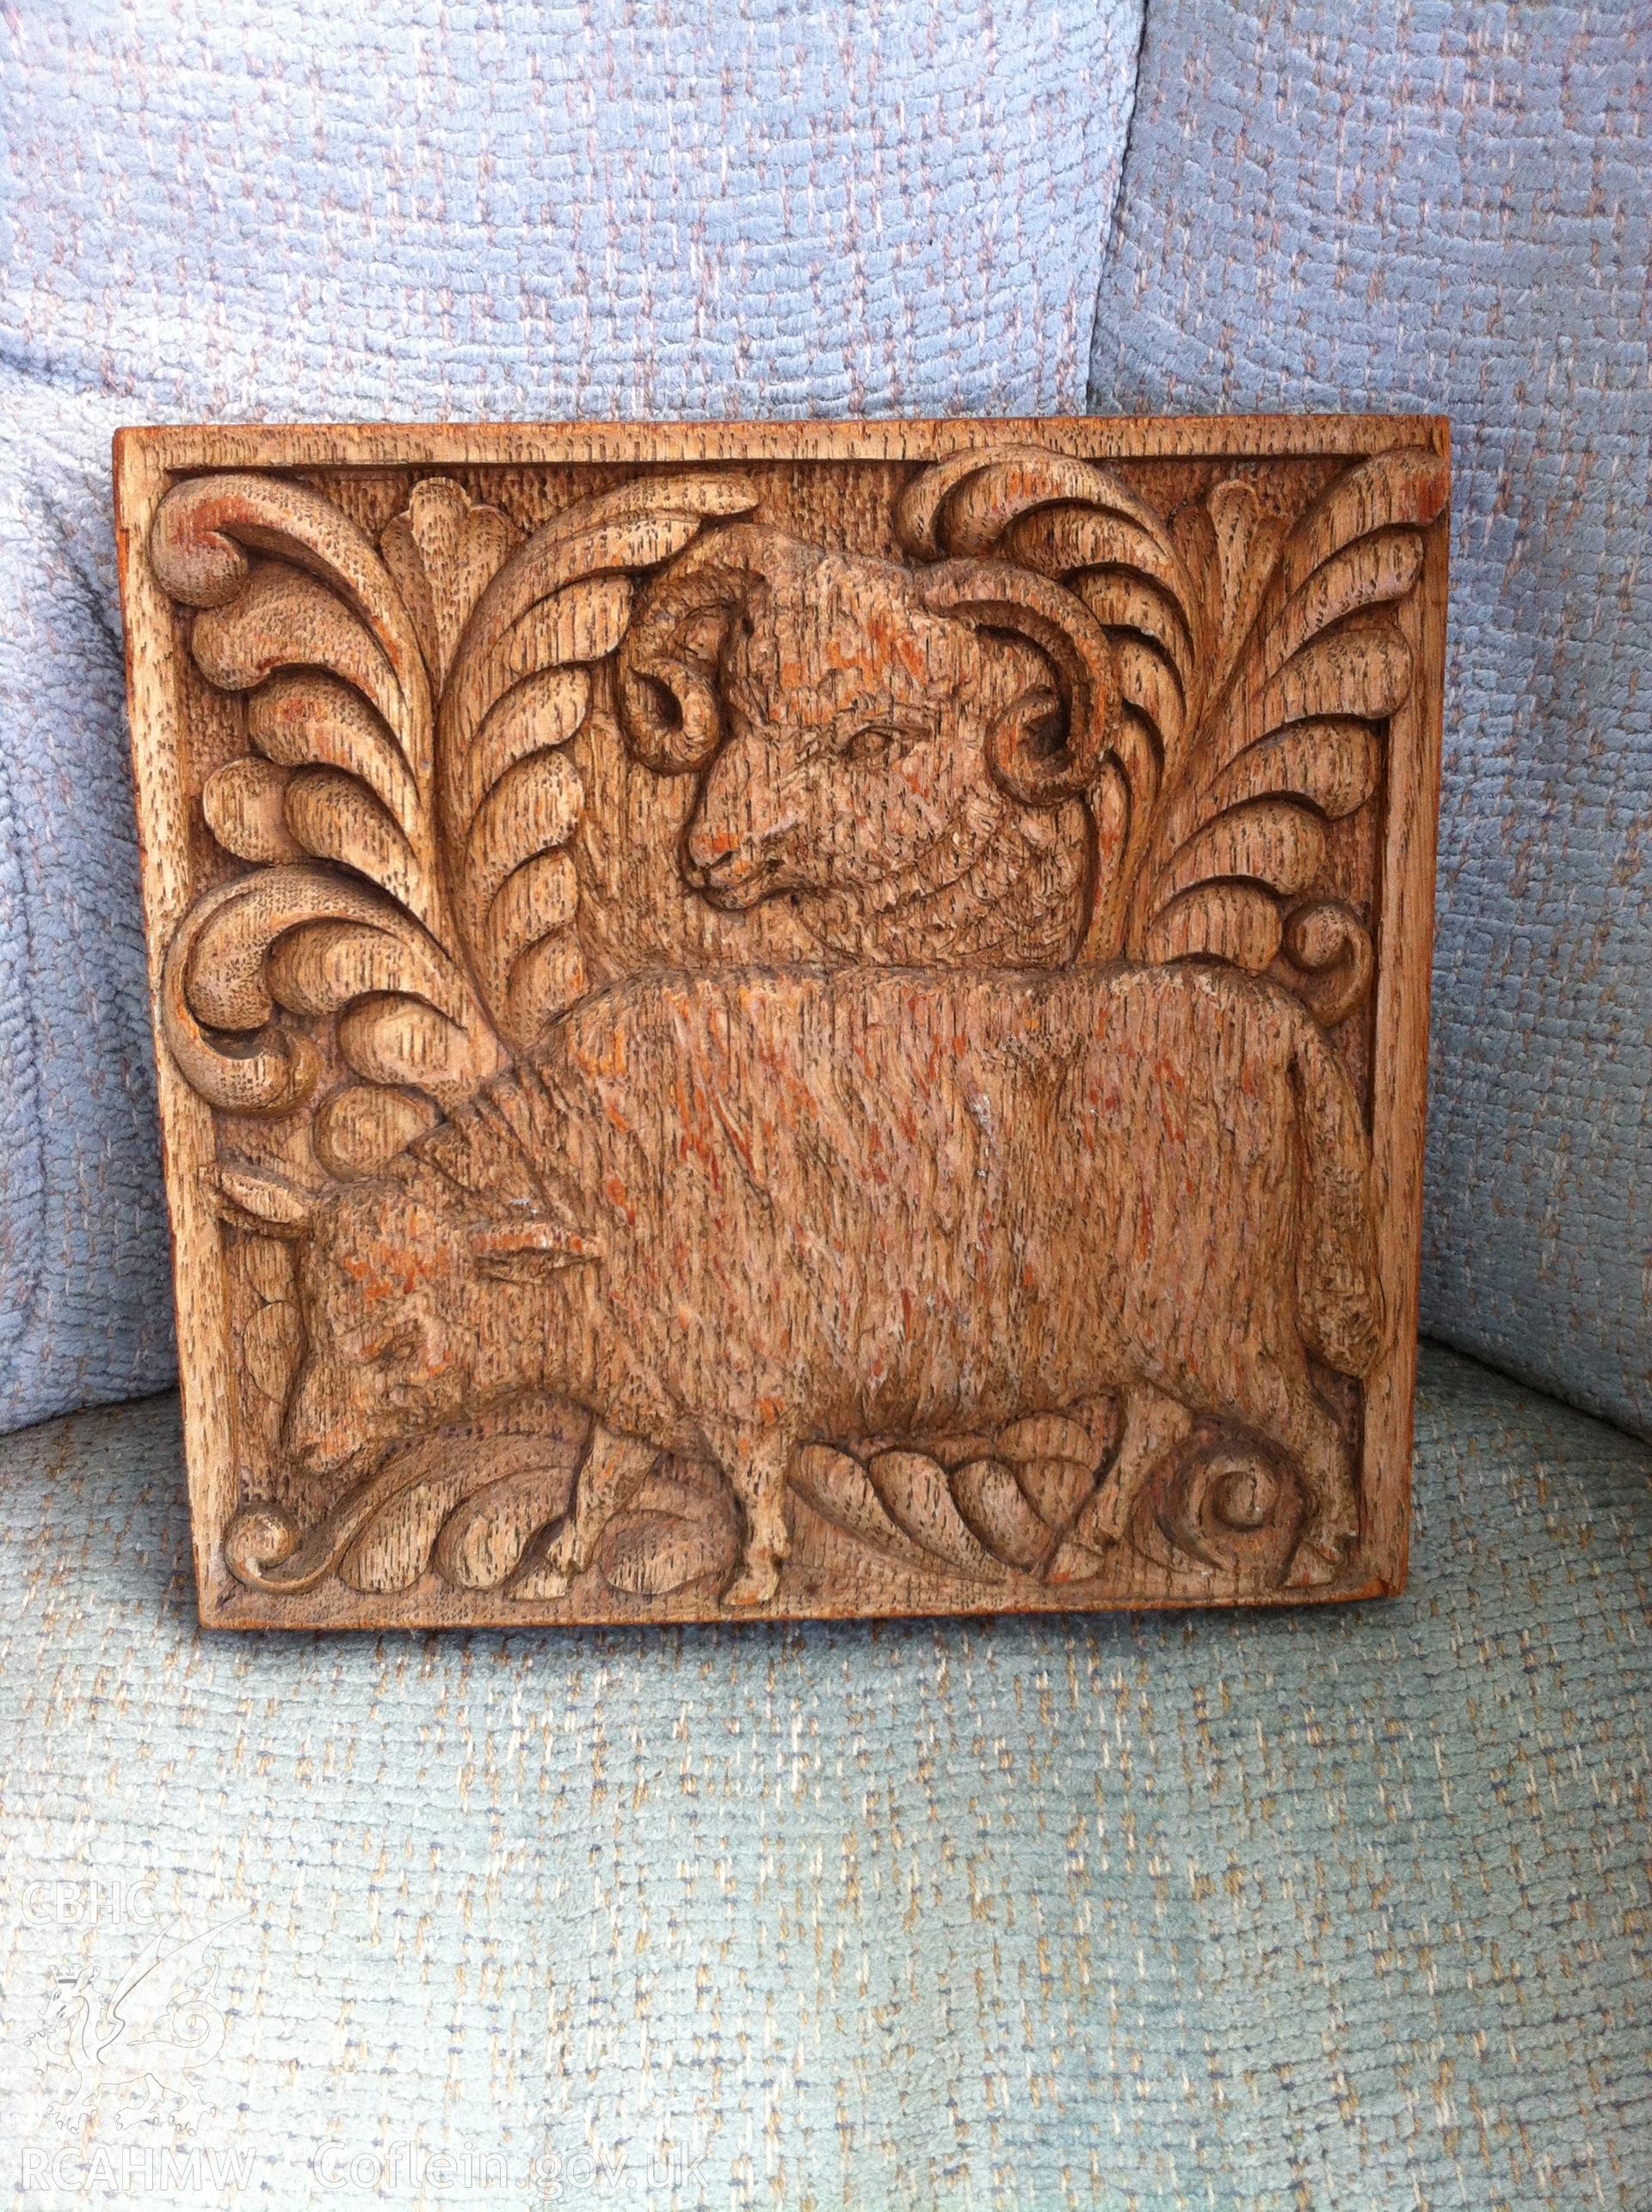 Digital photograph taken by Gillian Swan in 2017 showing wooden tile depicting two sheep. The tile is associated with Bryngwenallt Hall, Abergele.